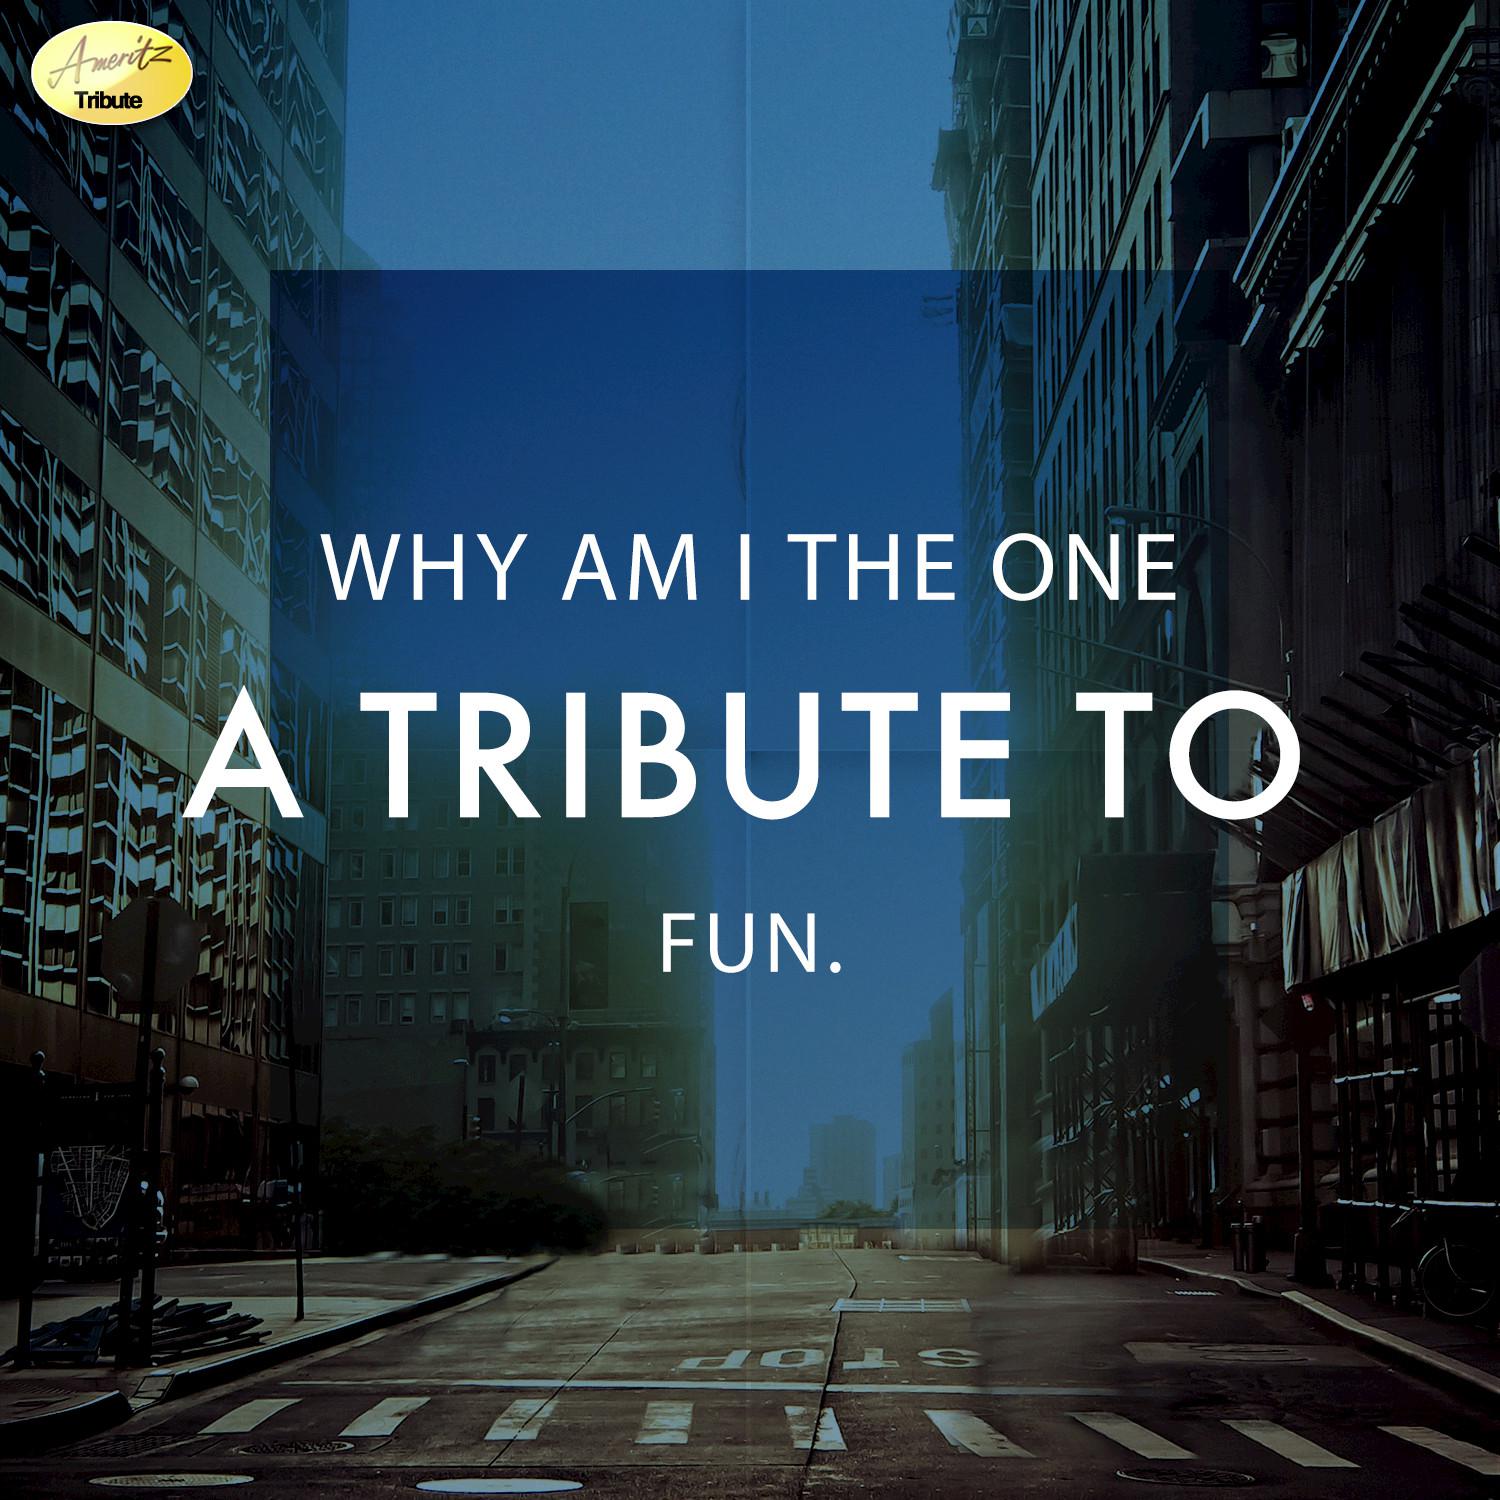 Why Am I the One - A Tribute to fun.